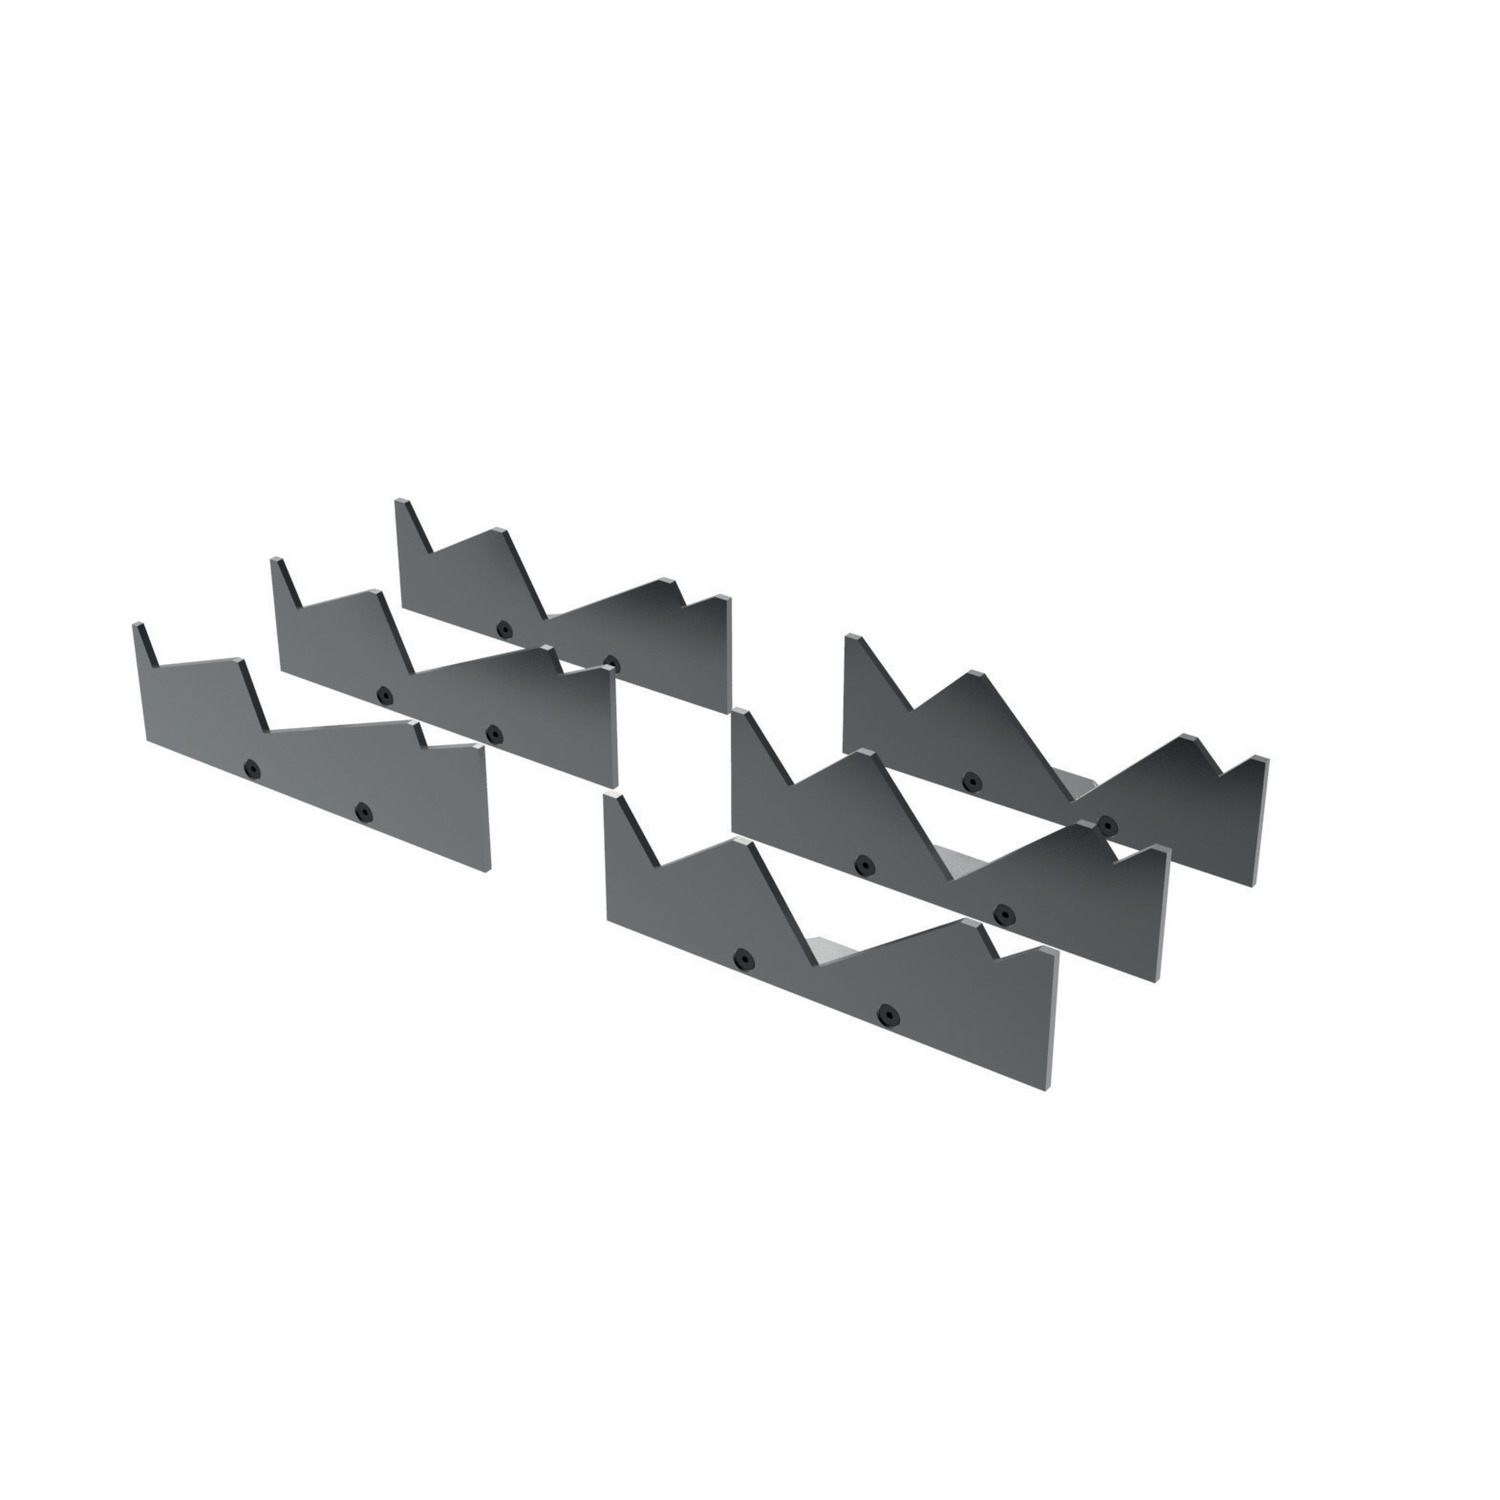 Product 19818, Vice Mill Angle Sets - AccuSnap for use with AccuSnap master jaws 19810 / 